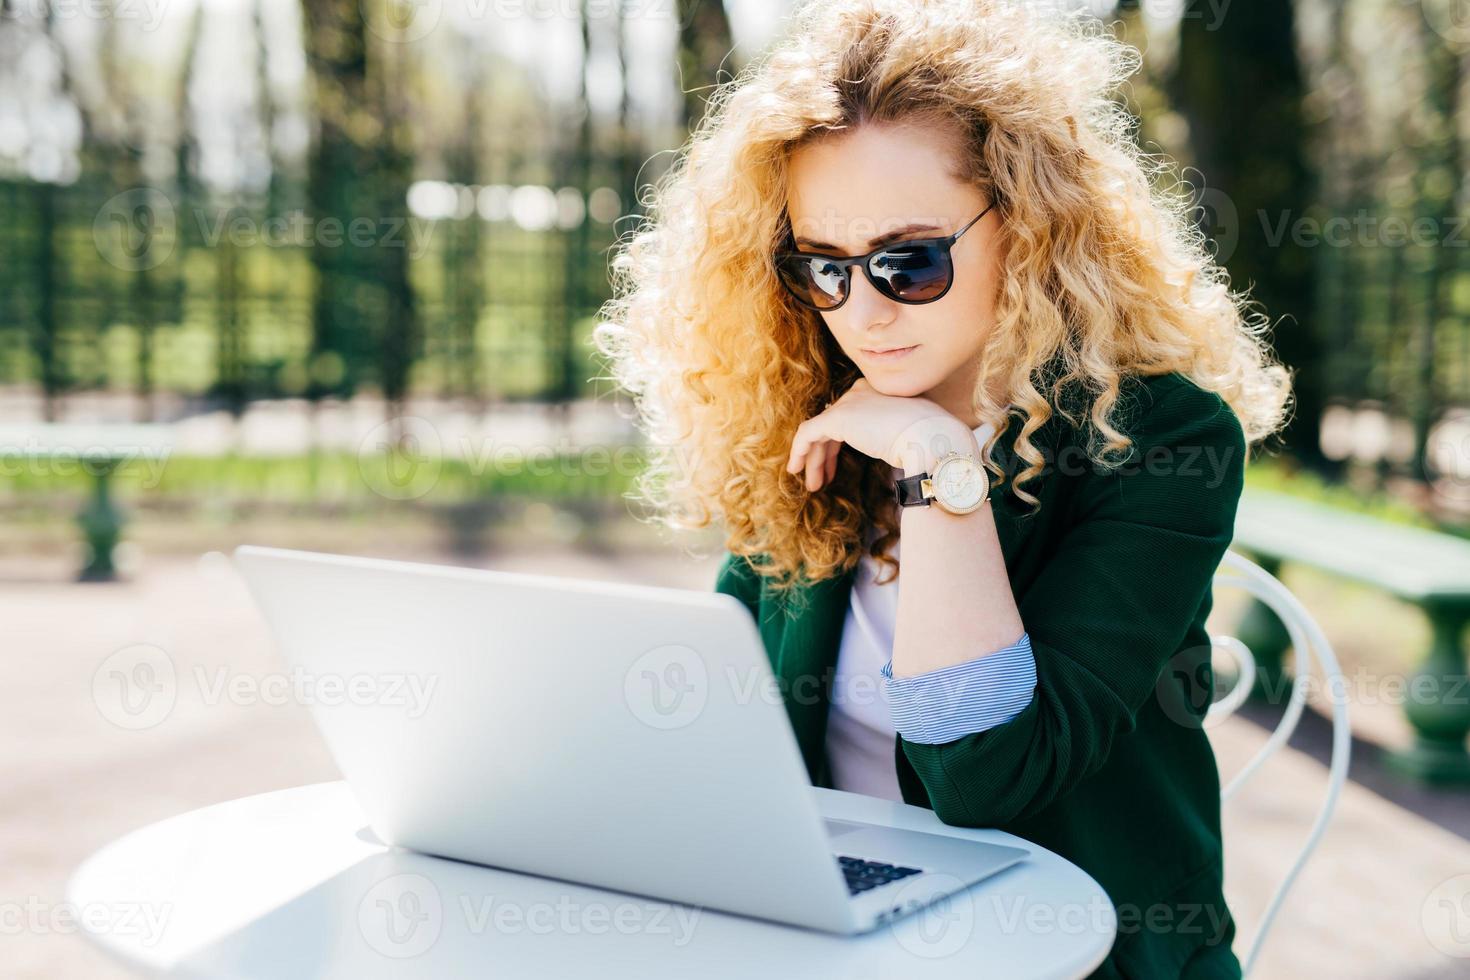 Young woman with blond curly hair wearing sunglasses and elegant green jacket sitting in front of open laptop outdoors reading news online having pensive expression. People, technology concept photo